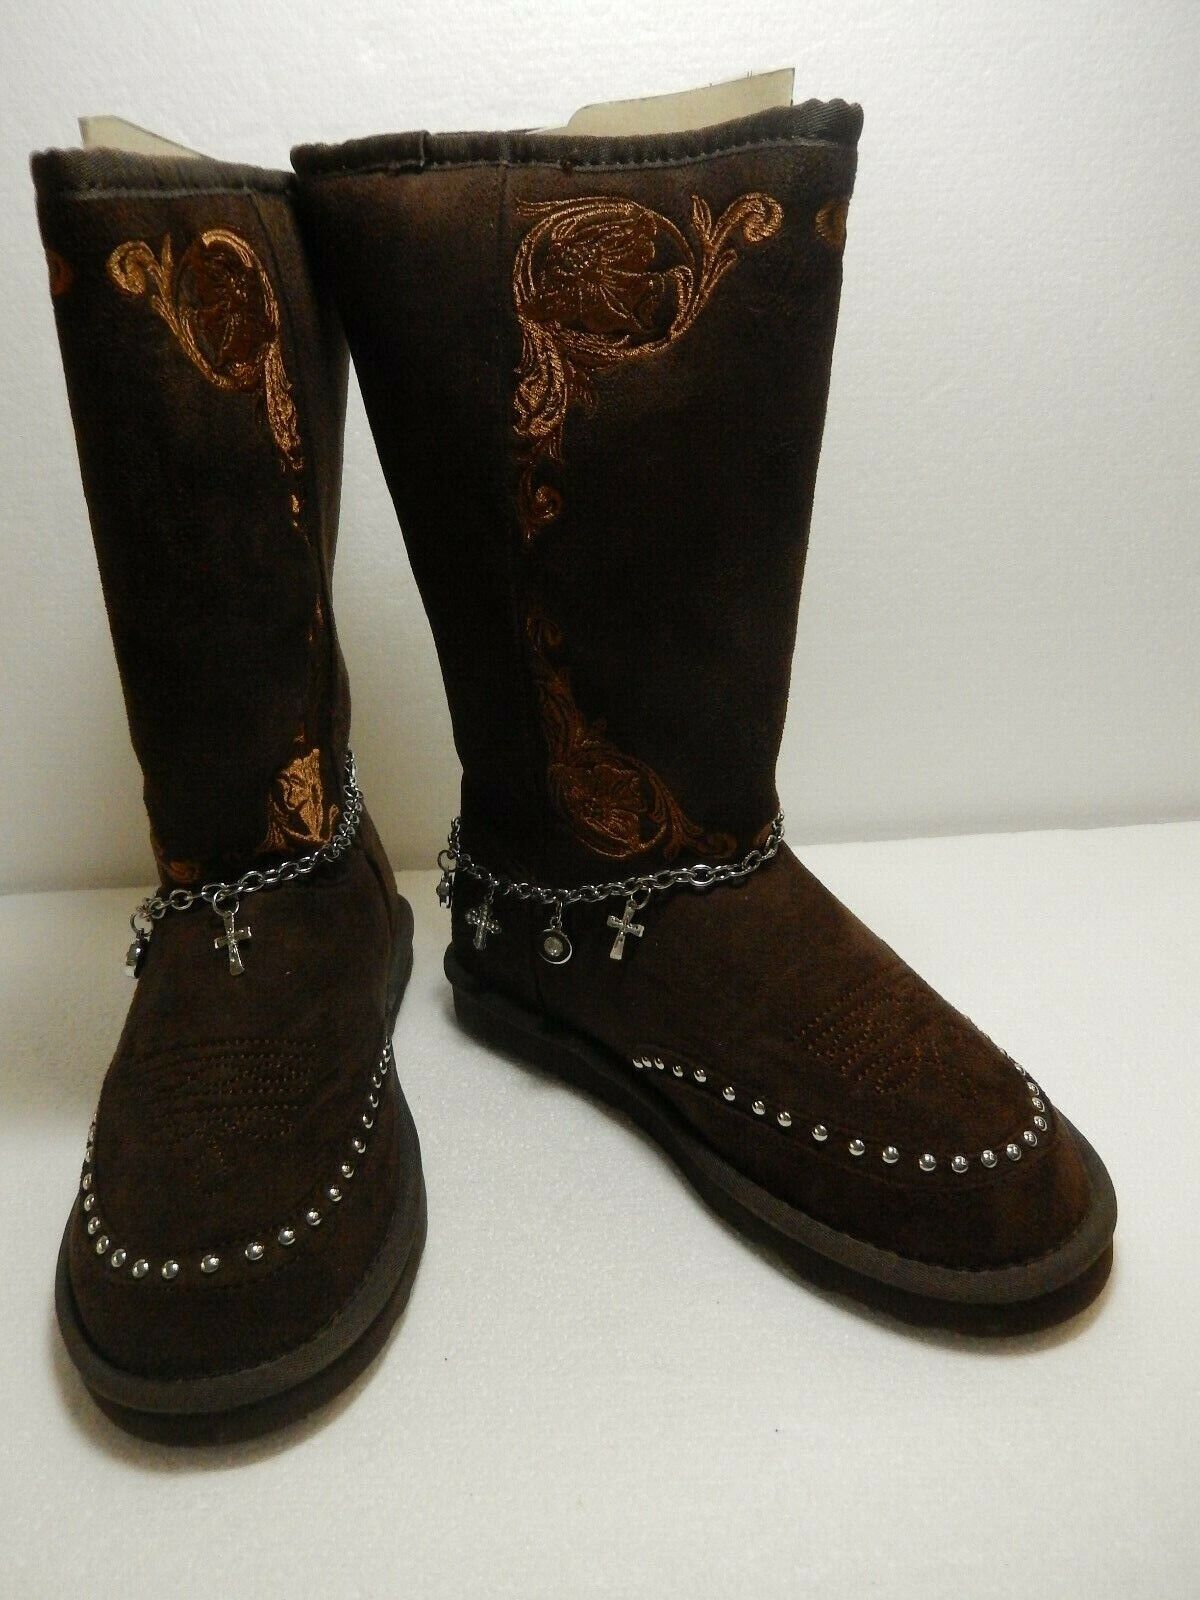 *NIB* Montana West Embroidered Collection Boots BST-021 BR CROSS BOOT CHAIN Sz 6